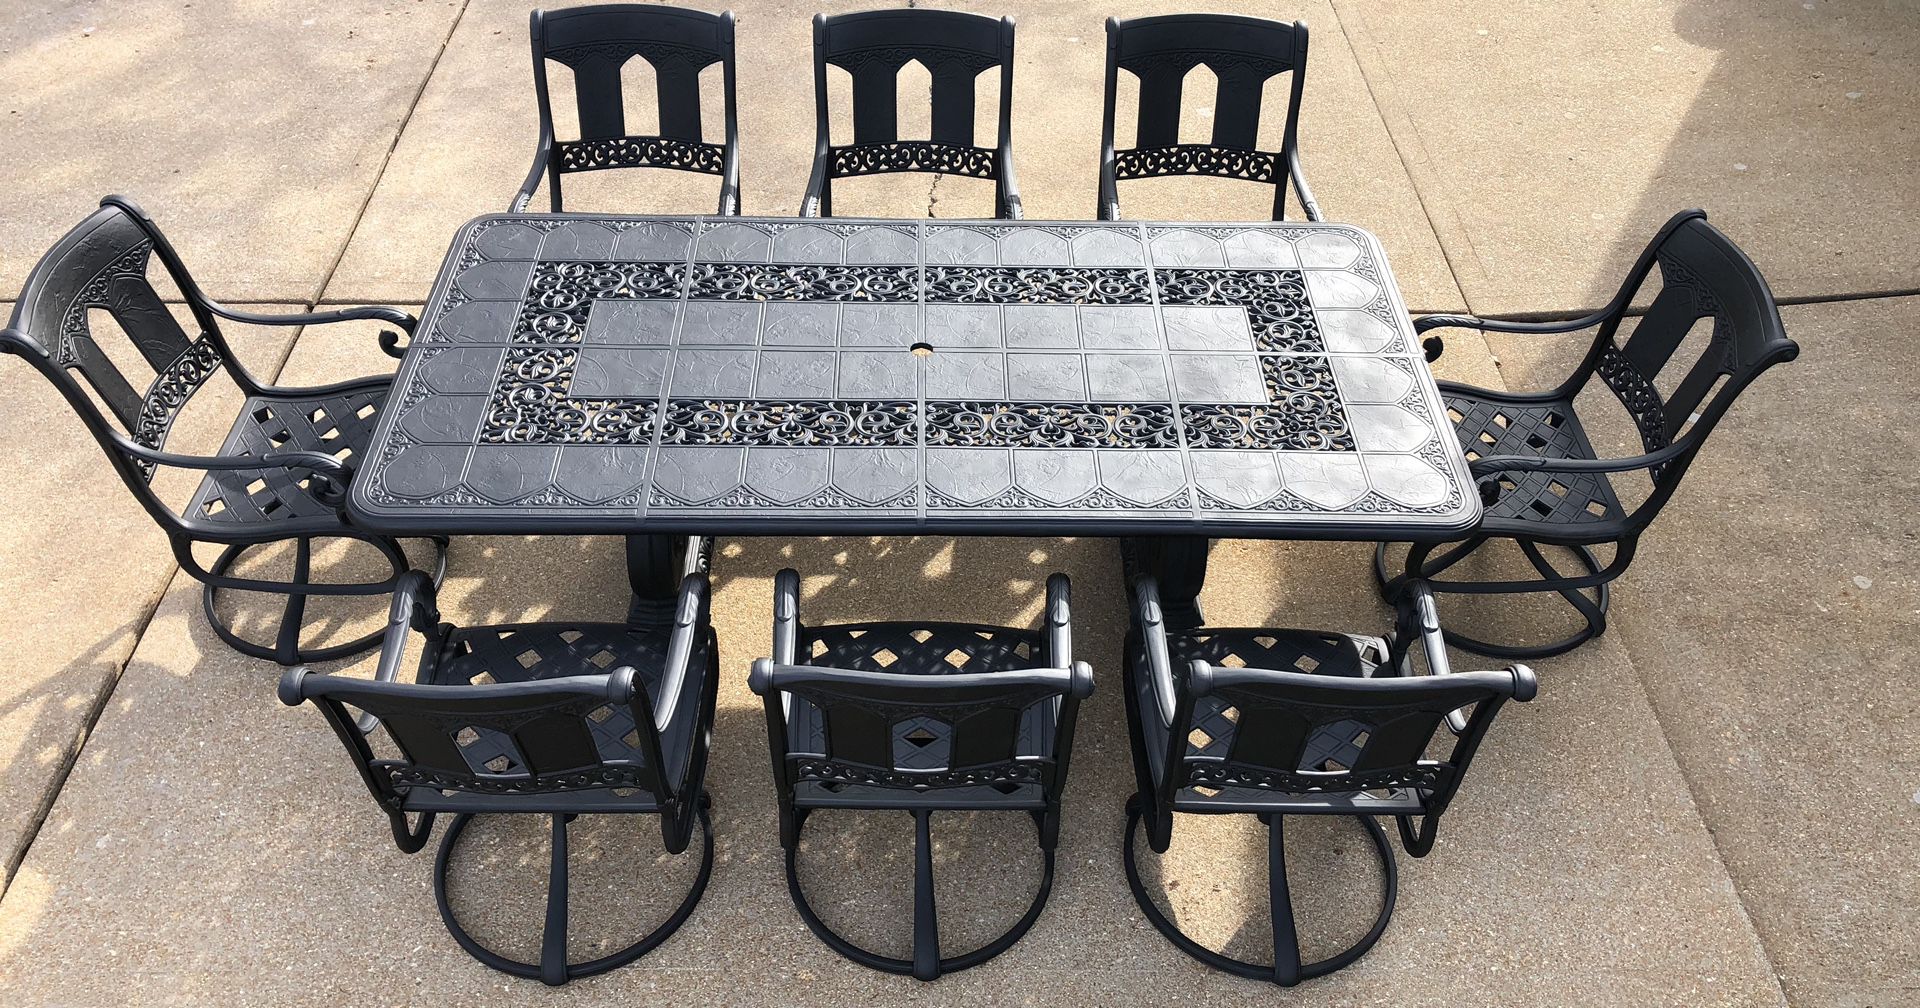 Hanamint Saint Moritz 8 Seat Outdoor Patio Furniture Dining Set Table And 8 Chairs High End Cast Aluminum Patio Set